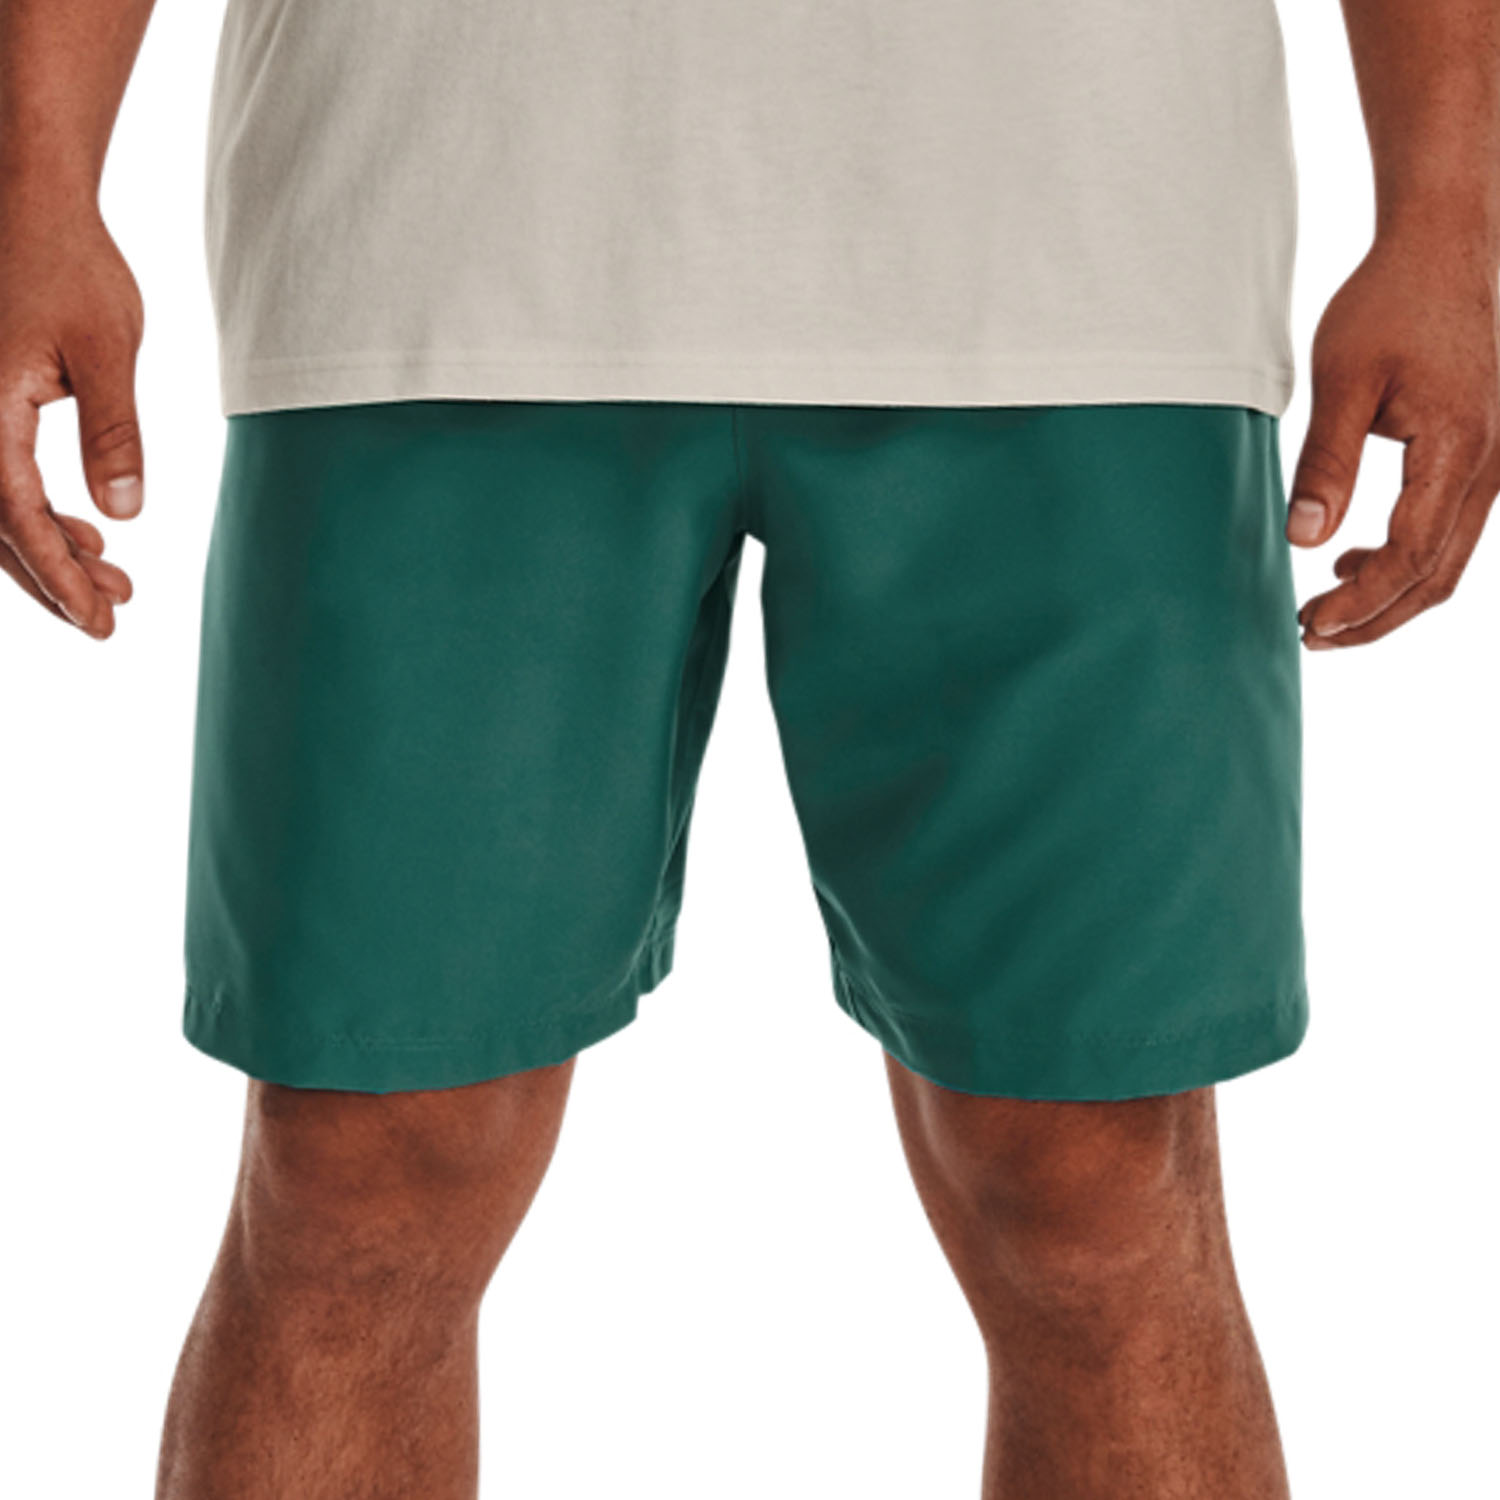 Under Armour Woven Graphic 8.5in Shorts - Coastal Teal/White